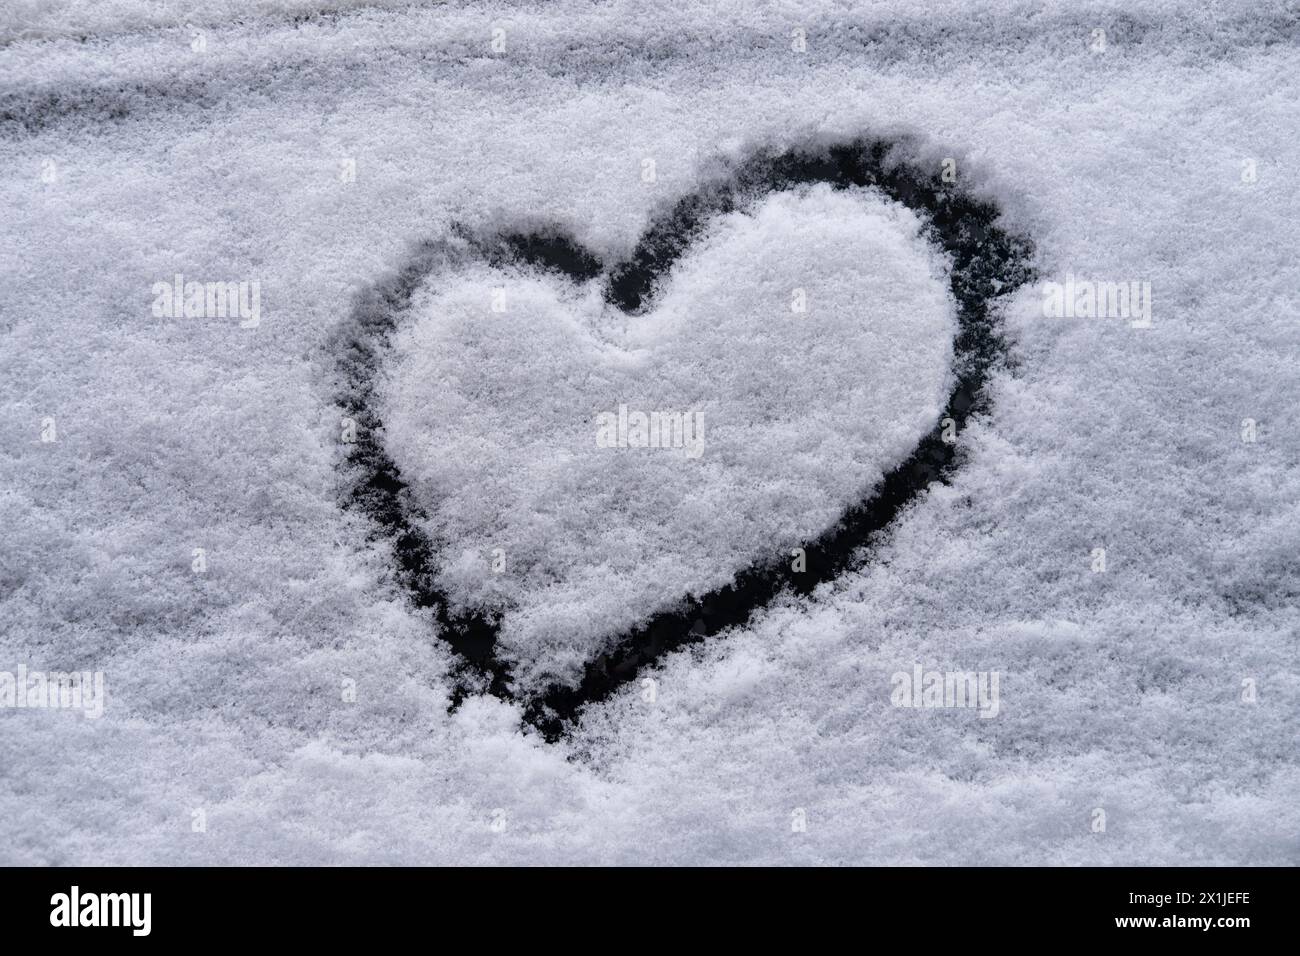 heart on snow, Valentine's Day, seasonal changes, winter weather conditions and snowfall, Nature and Environment, Atmospheric Phenomena, snowy environ Stock Photo